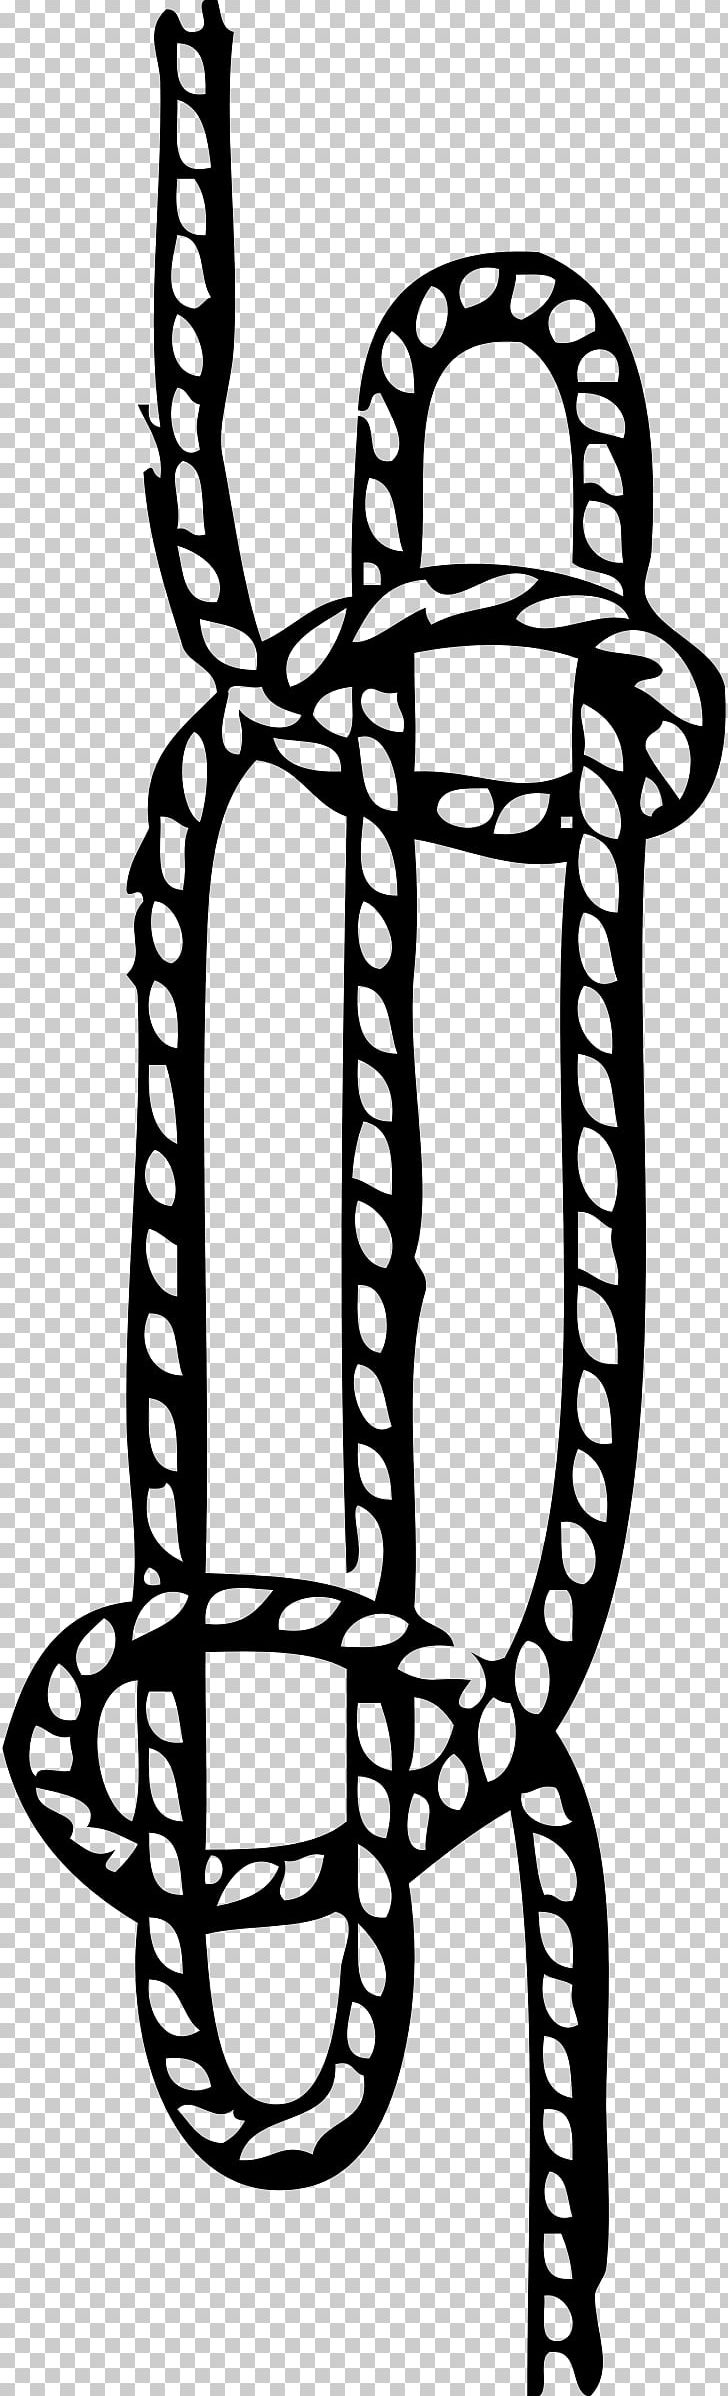 Knot Bowline On A Bight PNG, Clipart, Bight, Black And White, Bowline, Bowline On A Bight, Celtic Knot Free PNG Download